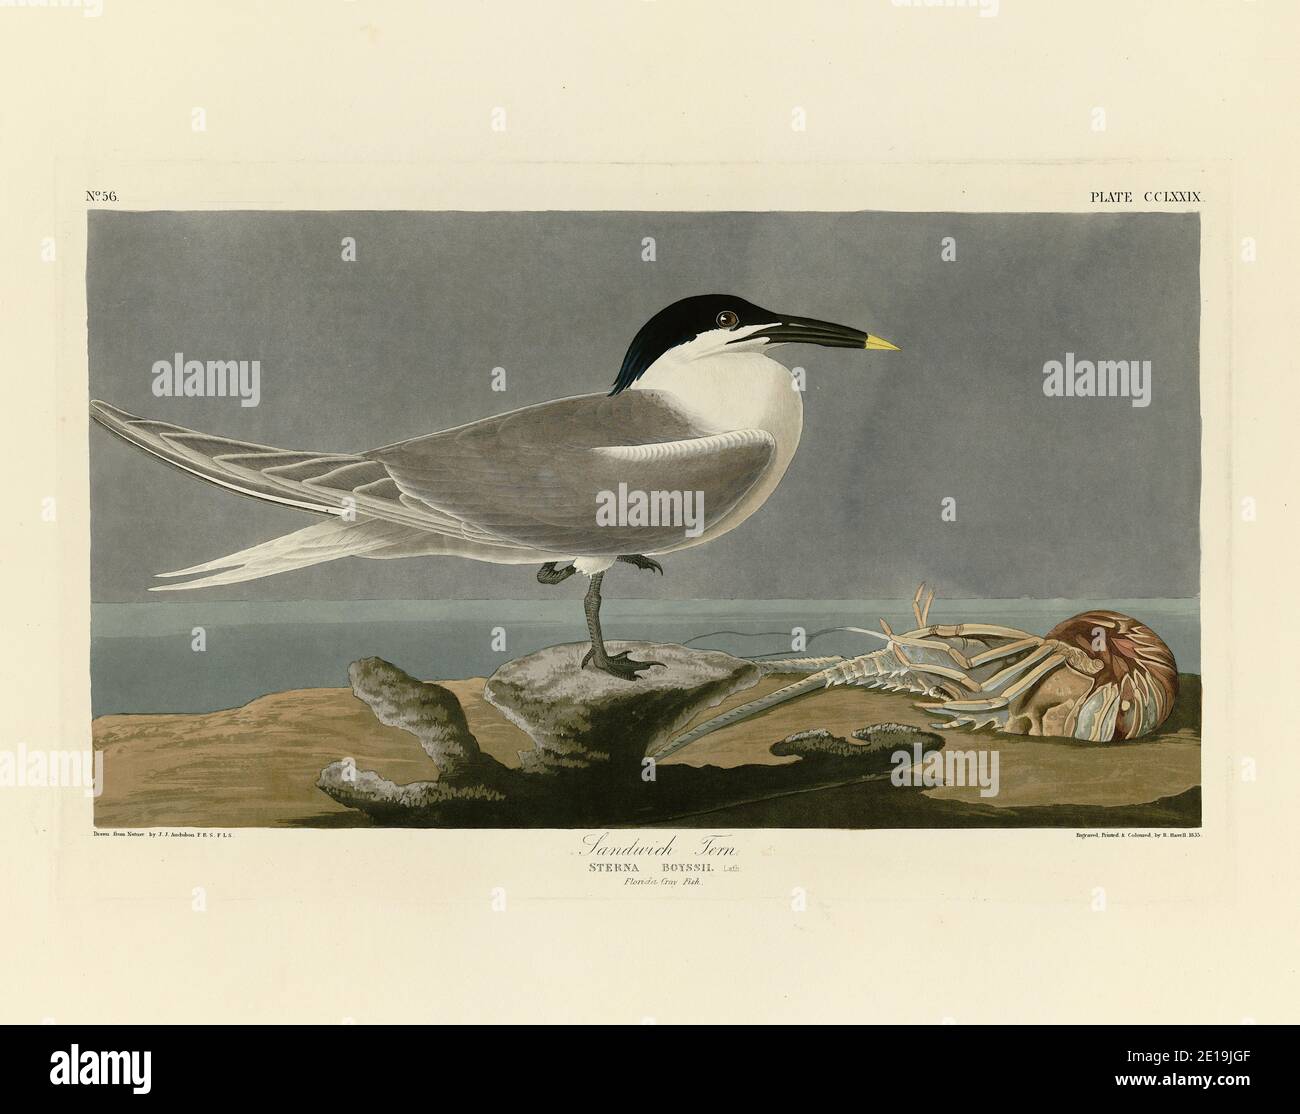 Plate 279 Sandwich Tern (Cabot's Tern) from The Birds of America folio (1827–1839) - John James Audubon, Very high resolution and quality edited image Stock Photo